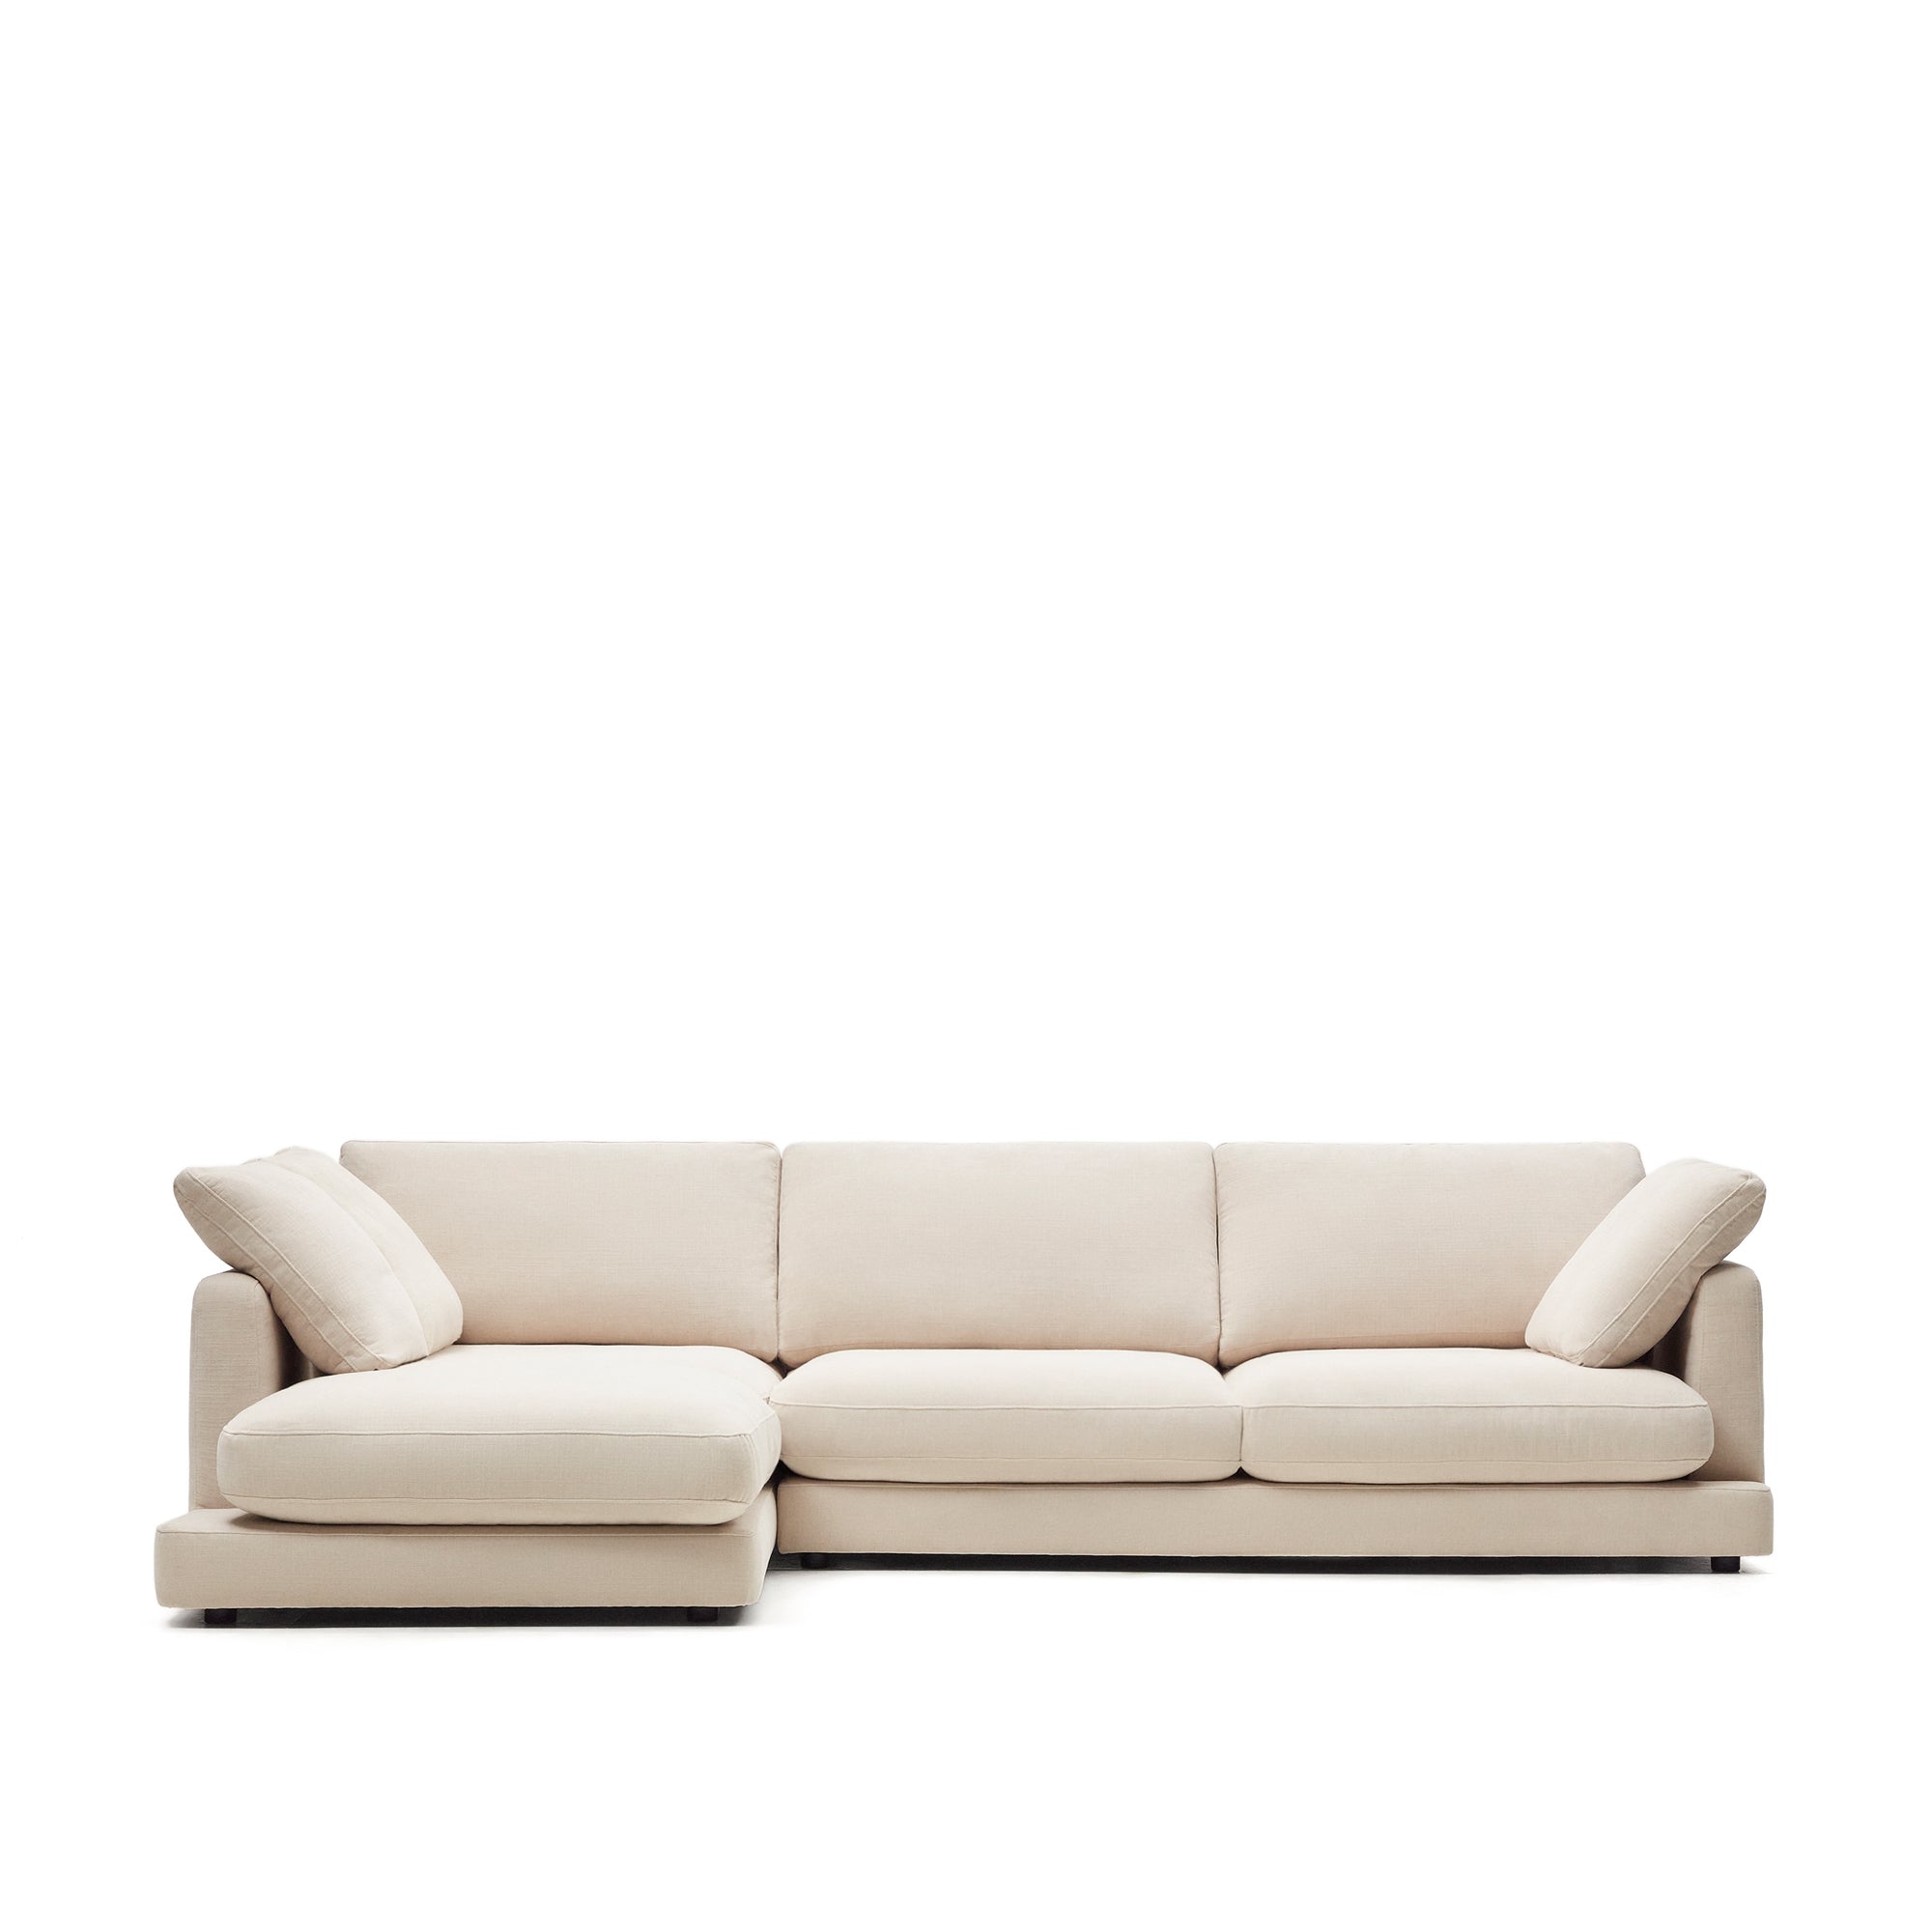 Gala 4 seater sofa with left side chaise longue in beige, 300 cm